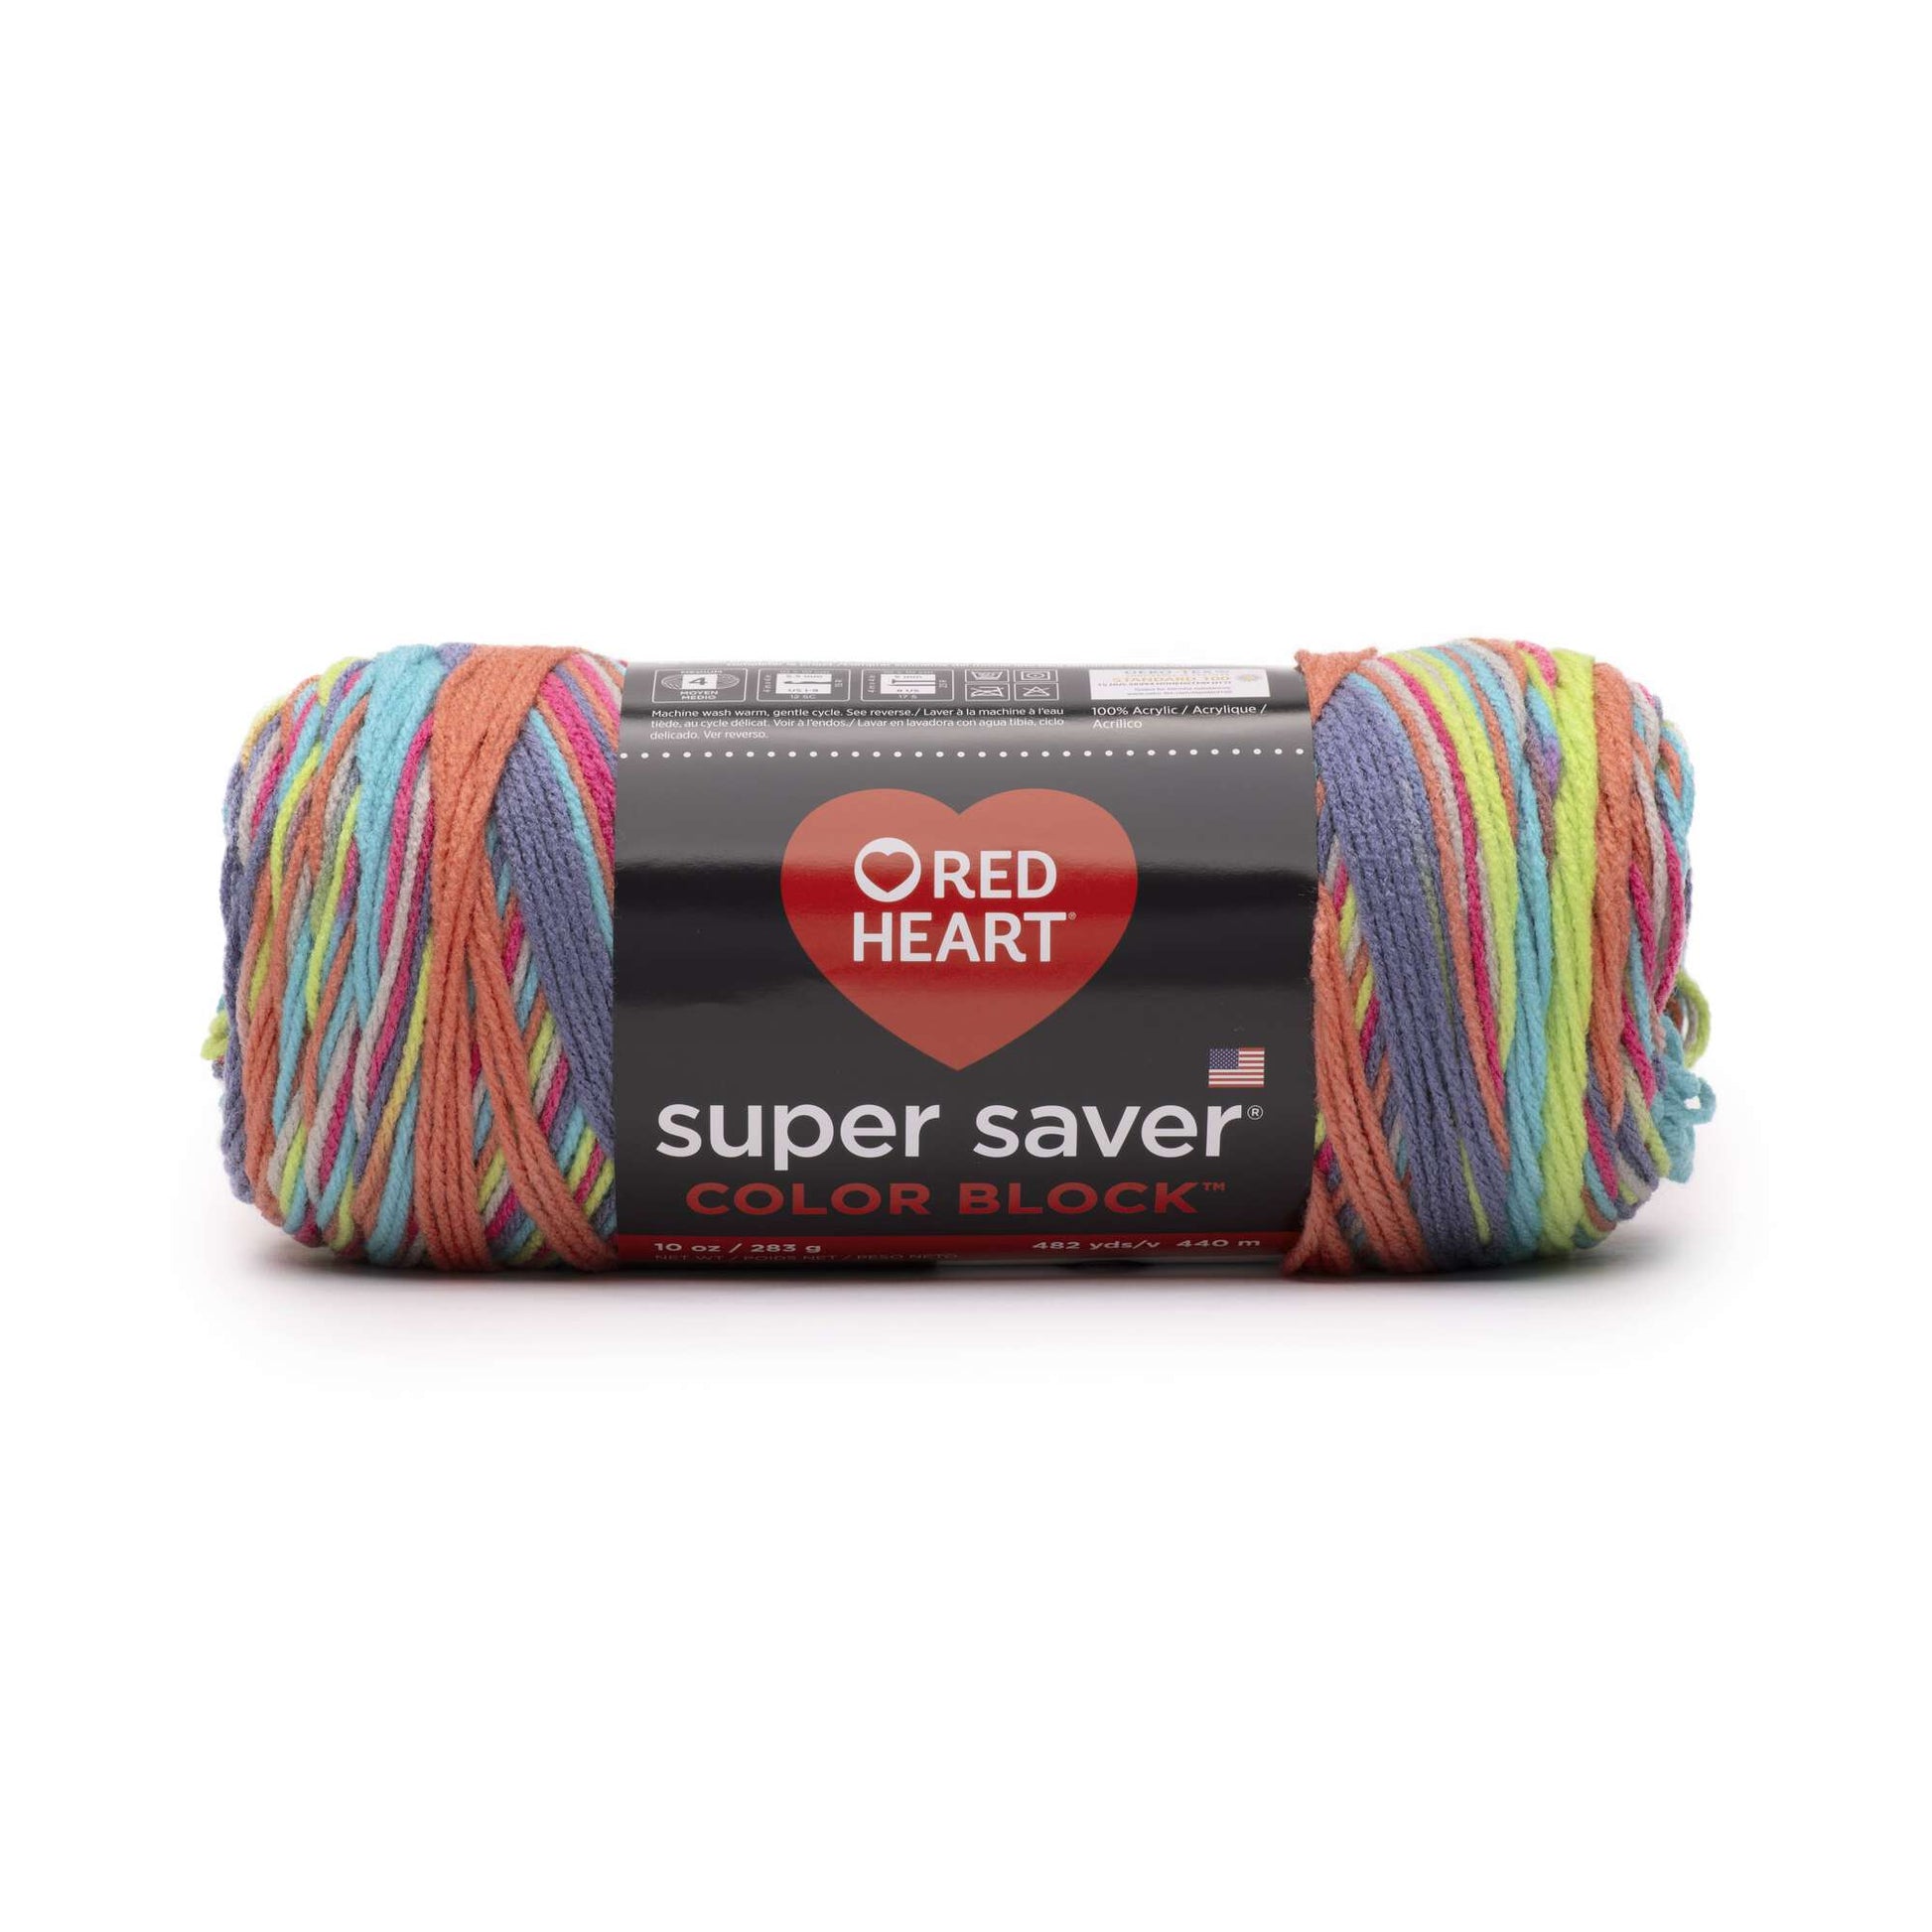 Red Heart Super Saver Yarn by Red Heart